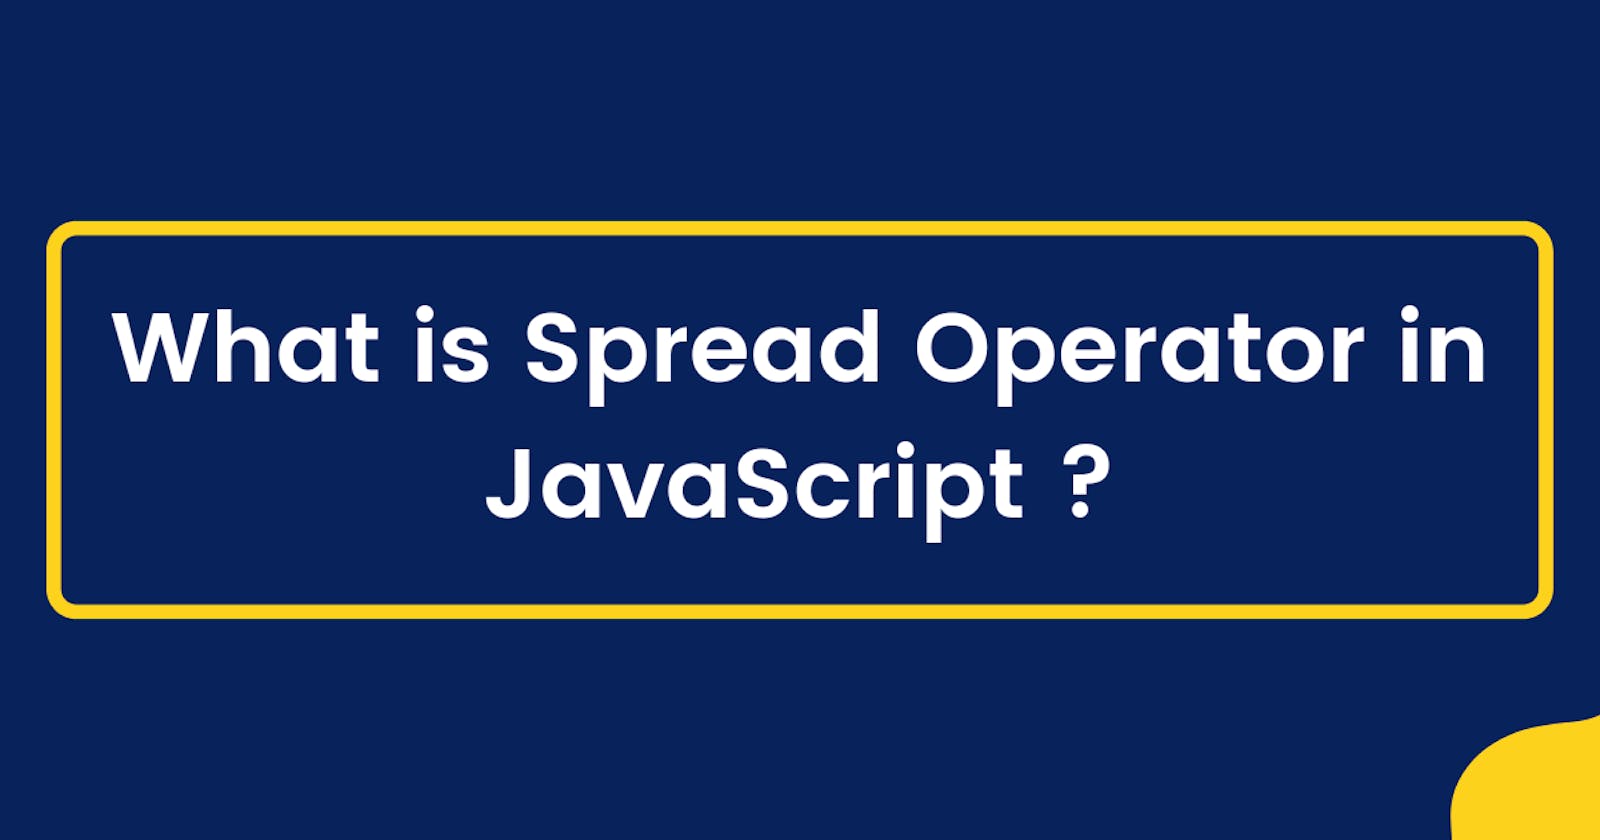 What is Spread Operator in JavaScript?